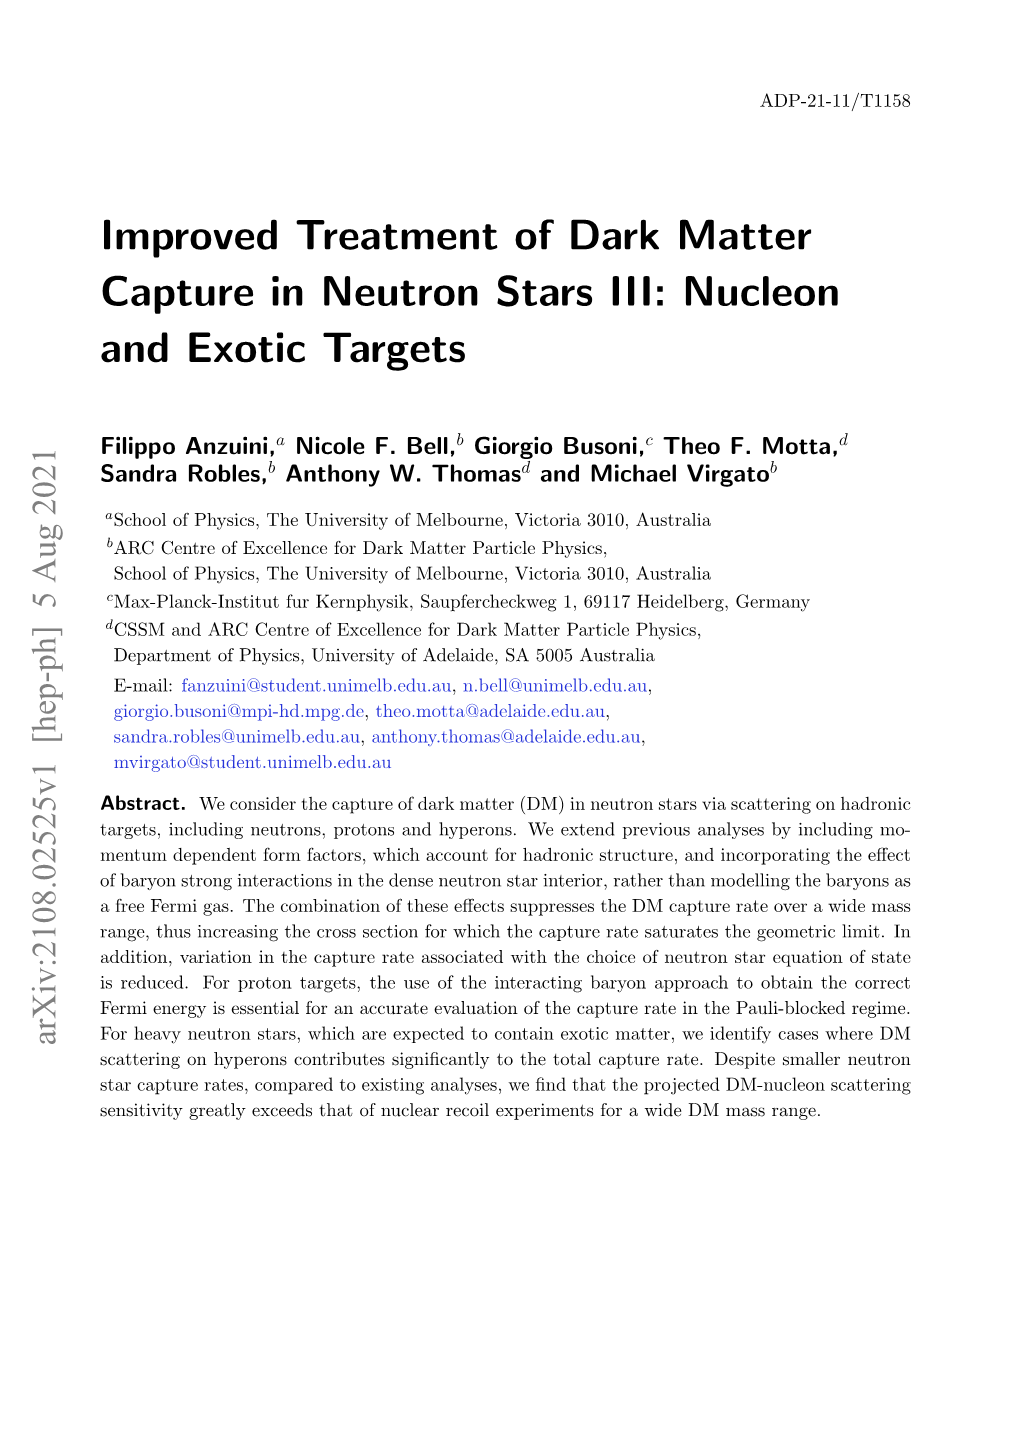 Improved Treatment of Dark Matter Capture in Neutron Stars III: Nucleon and Exotic Targets